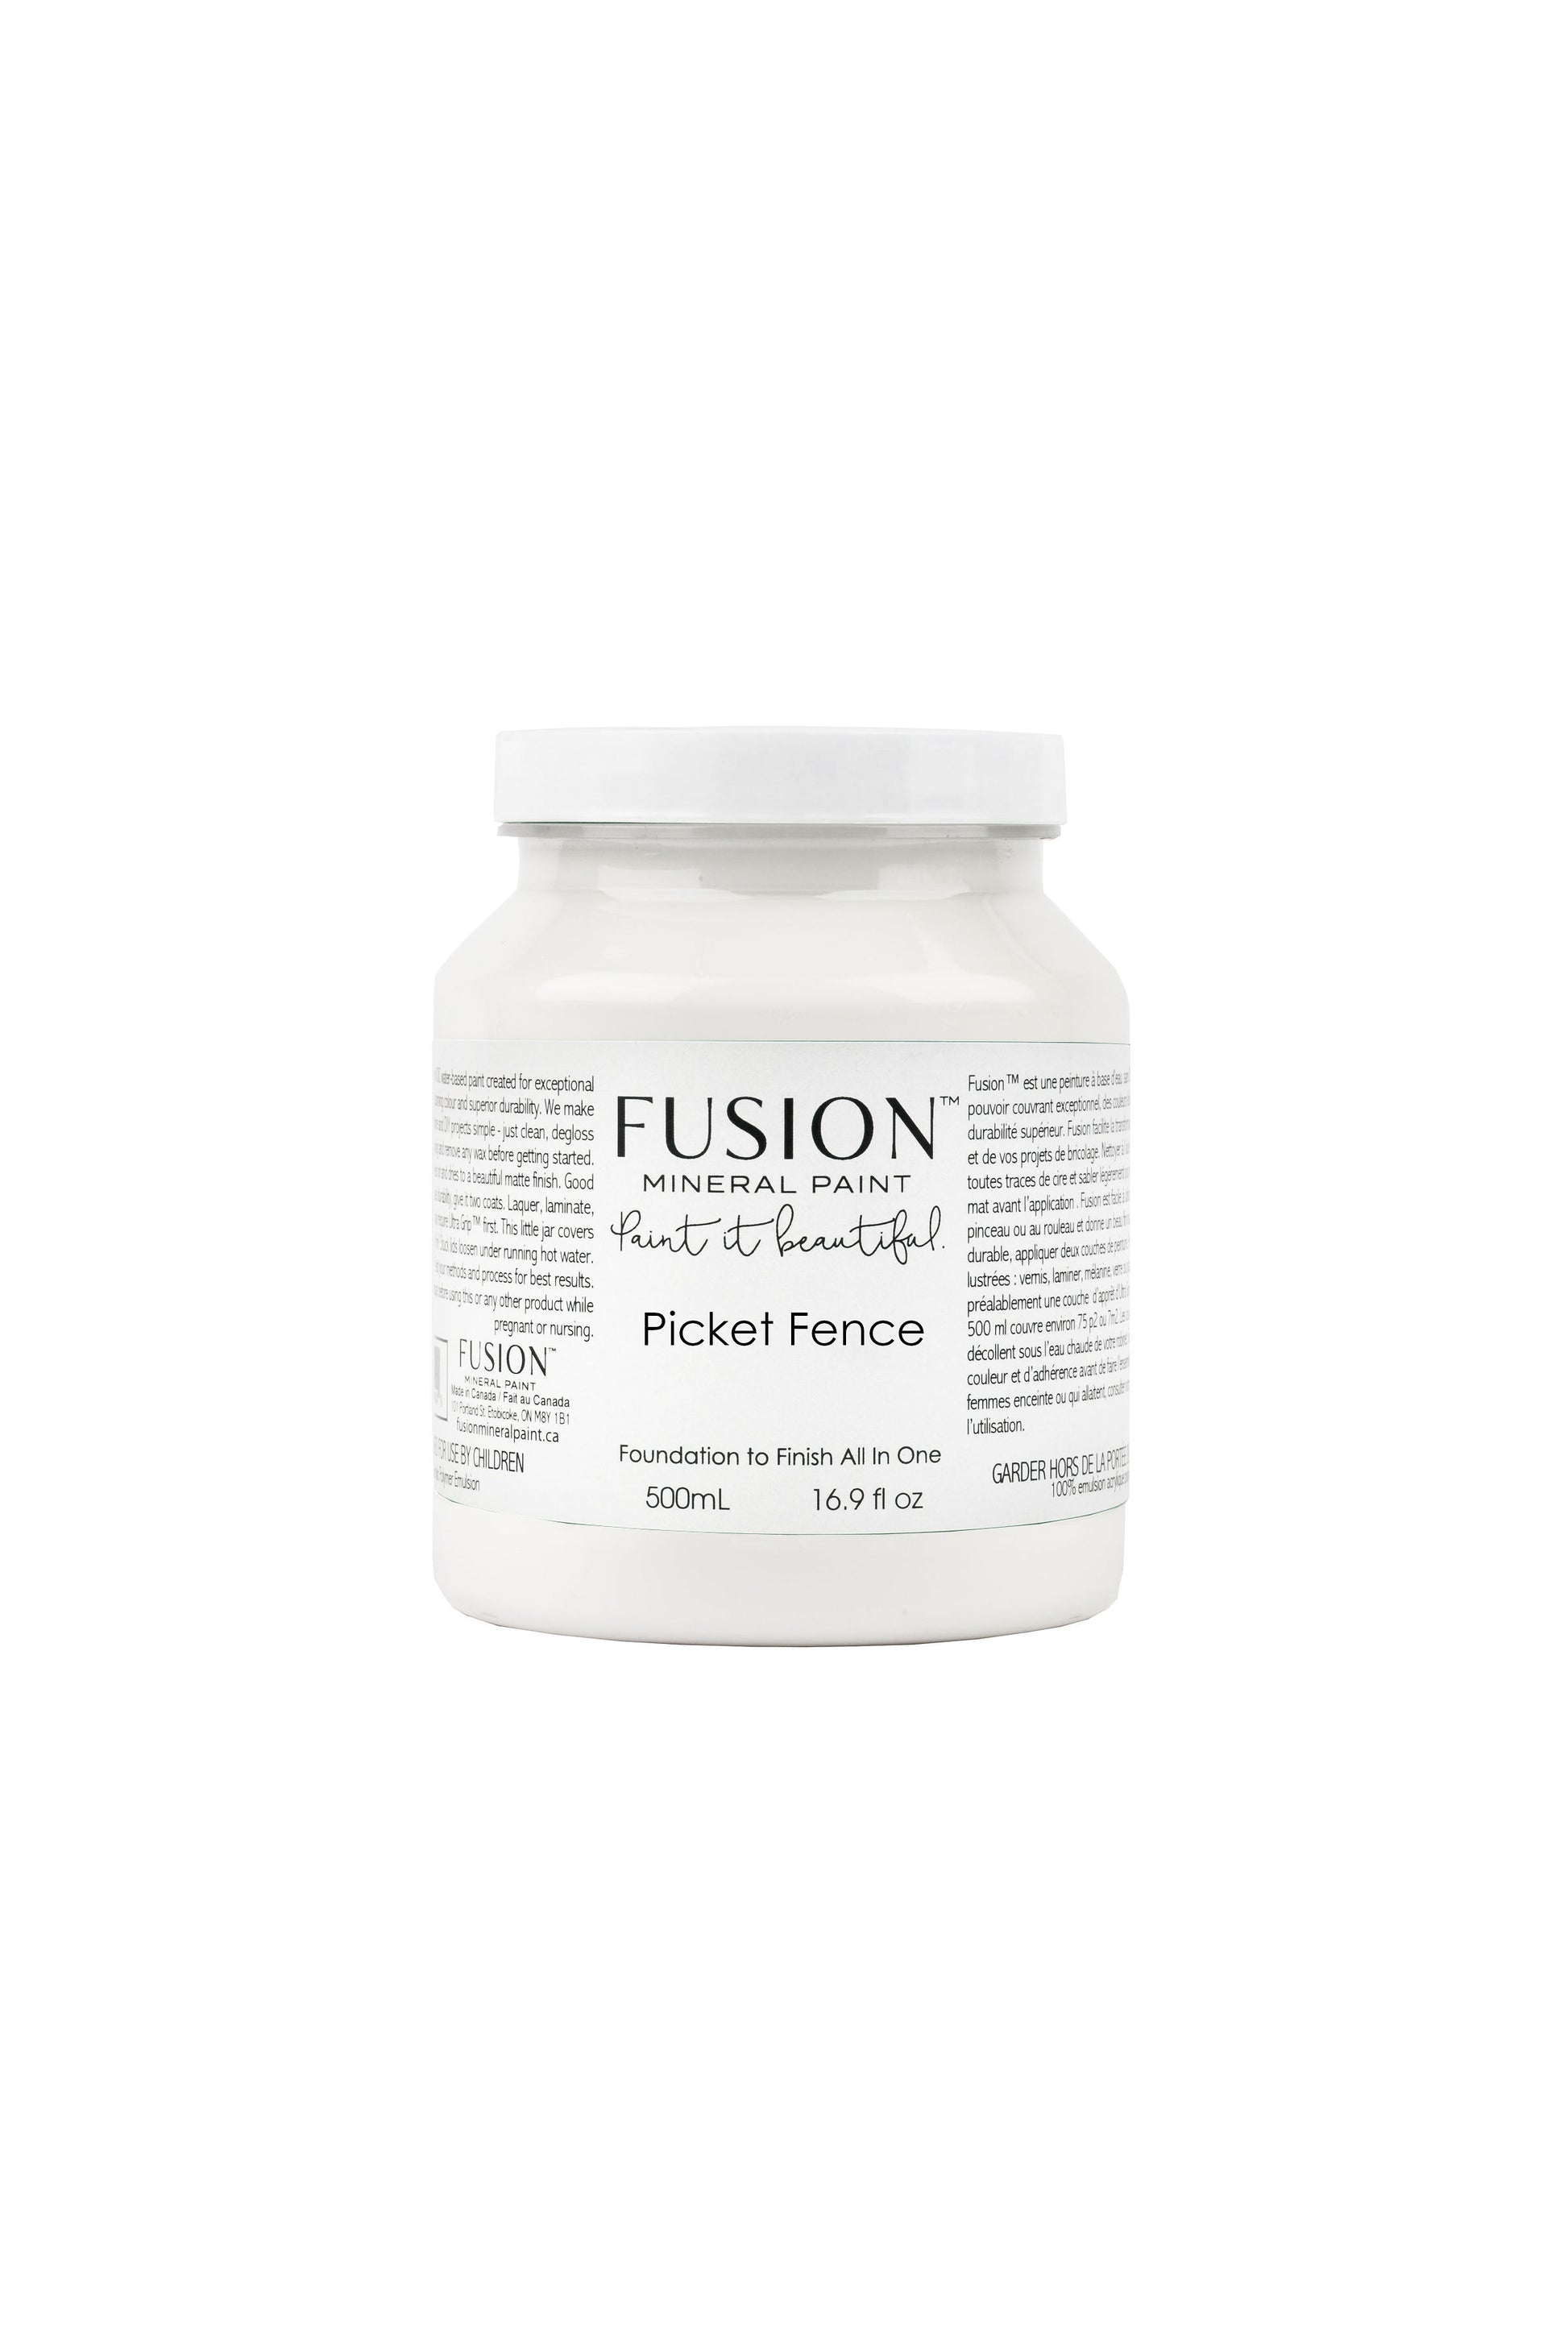 Picket Fence Fusion Mineral Paint, Pure White Paint Color| 500ml Pint Size